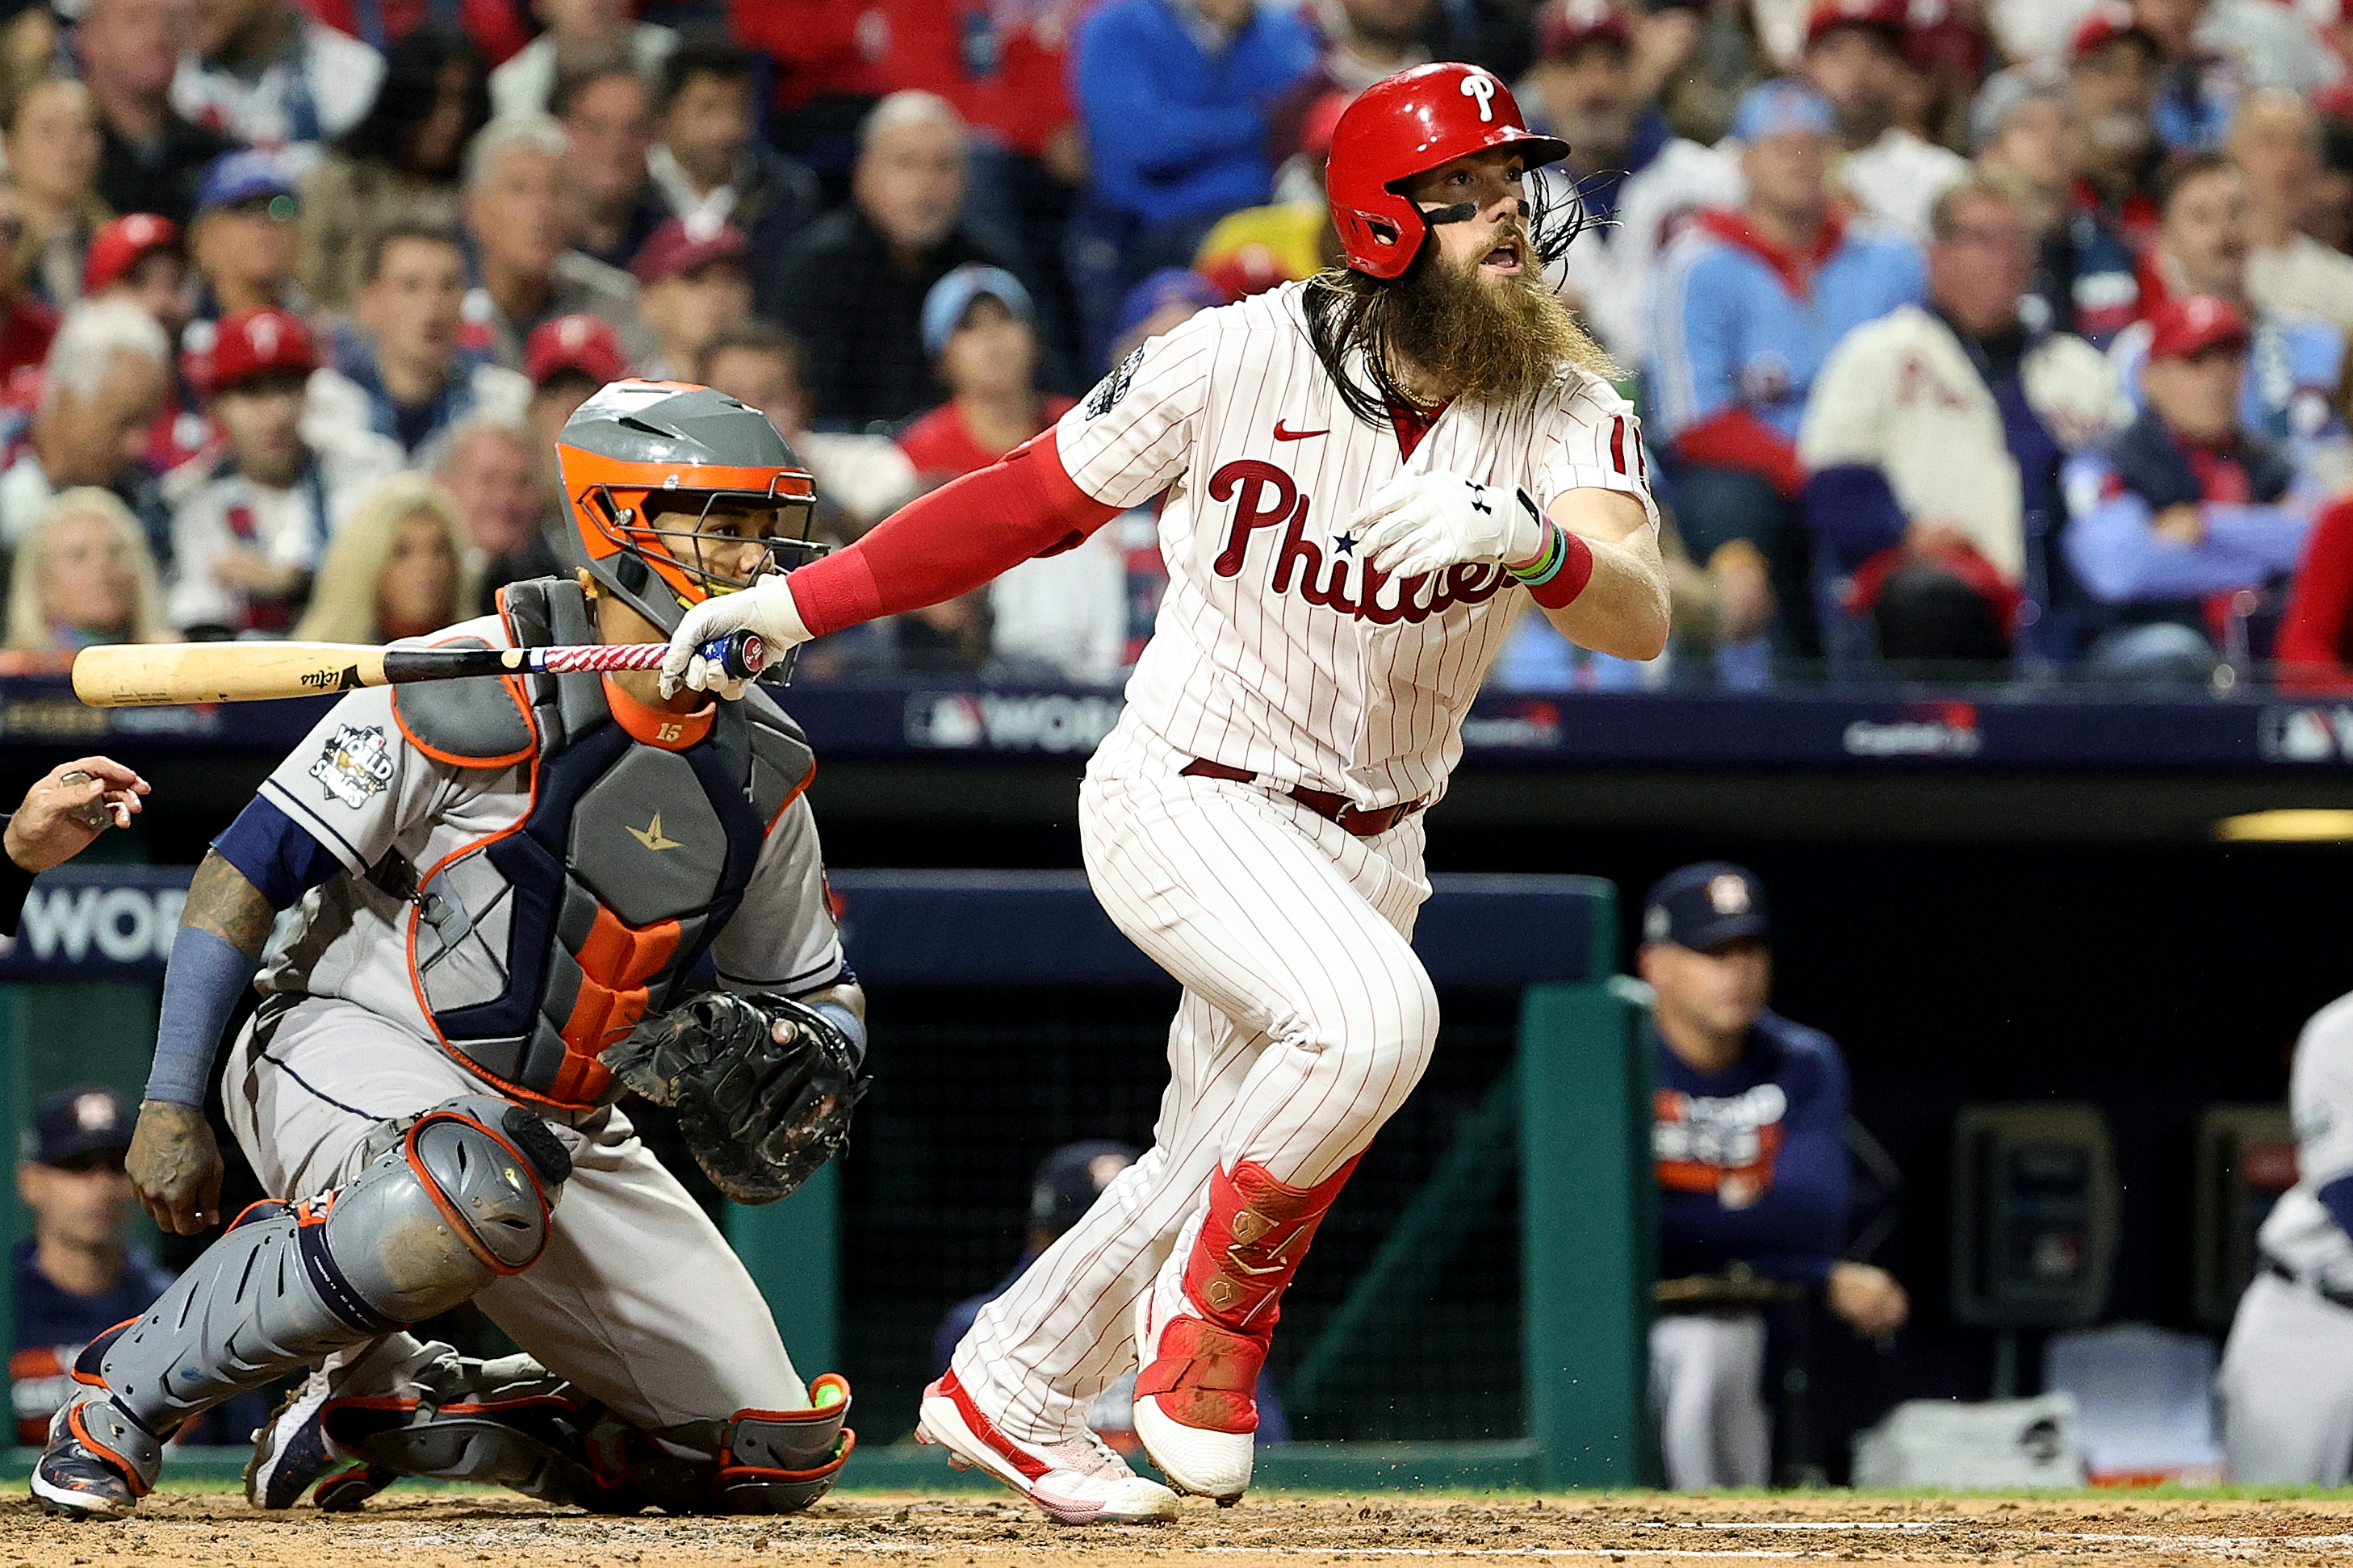 Bryce Harper shines as Phillies aim for second straight World Series –